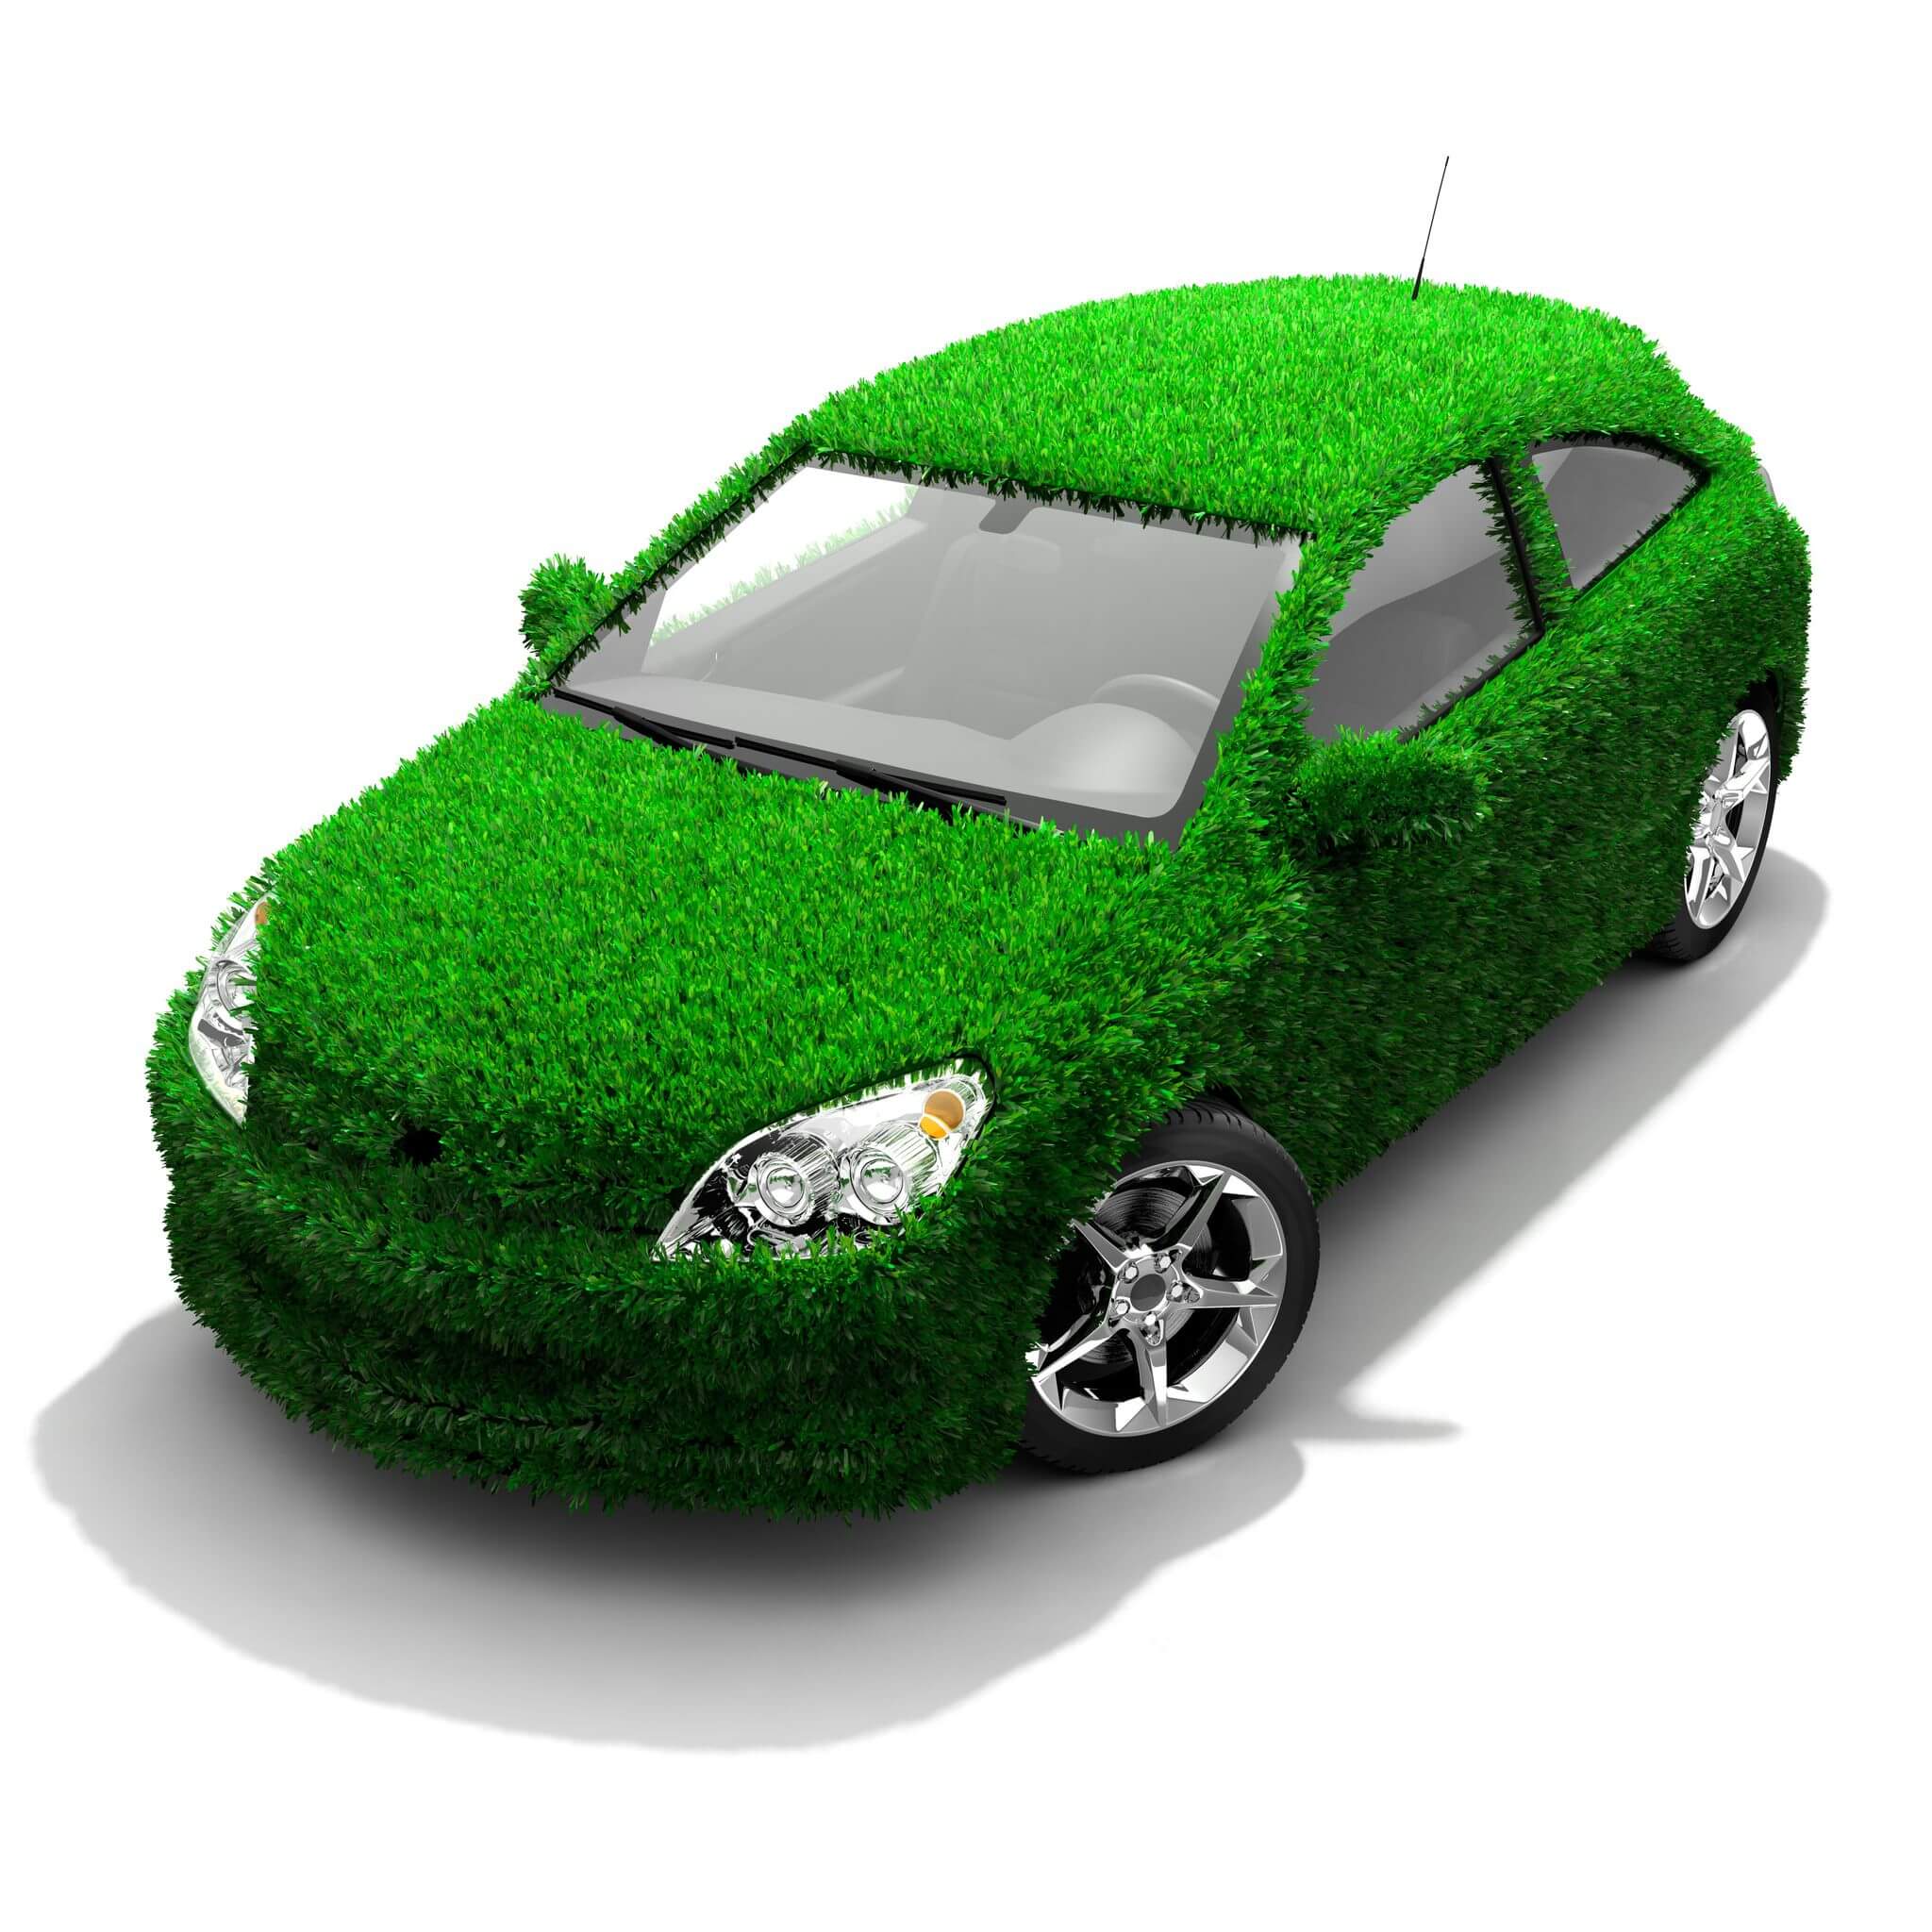 Eco-Friendly Cars: Saving the Planet and Your Wallet - Advantages of hybrid cars